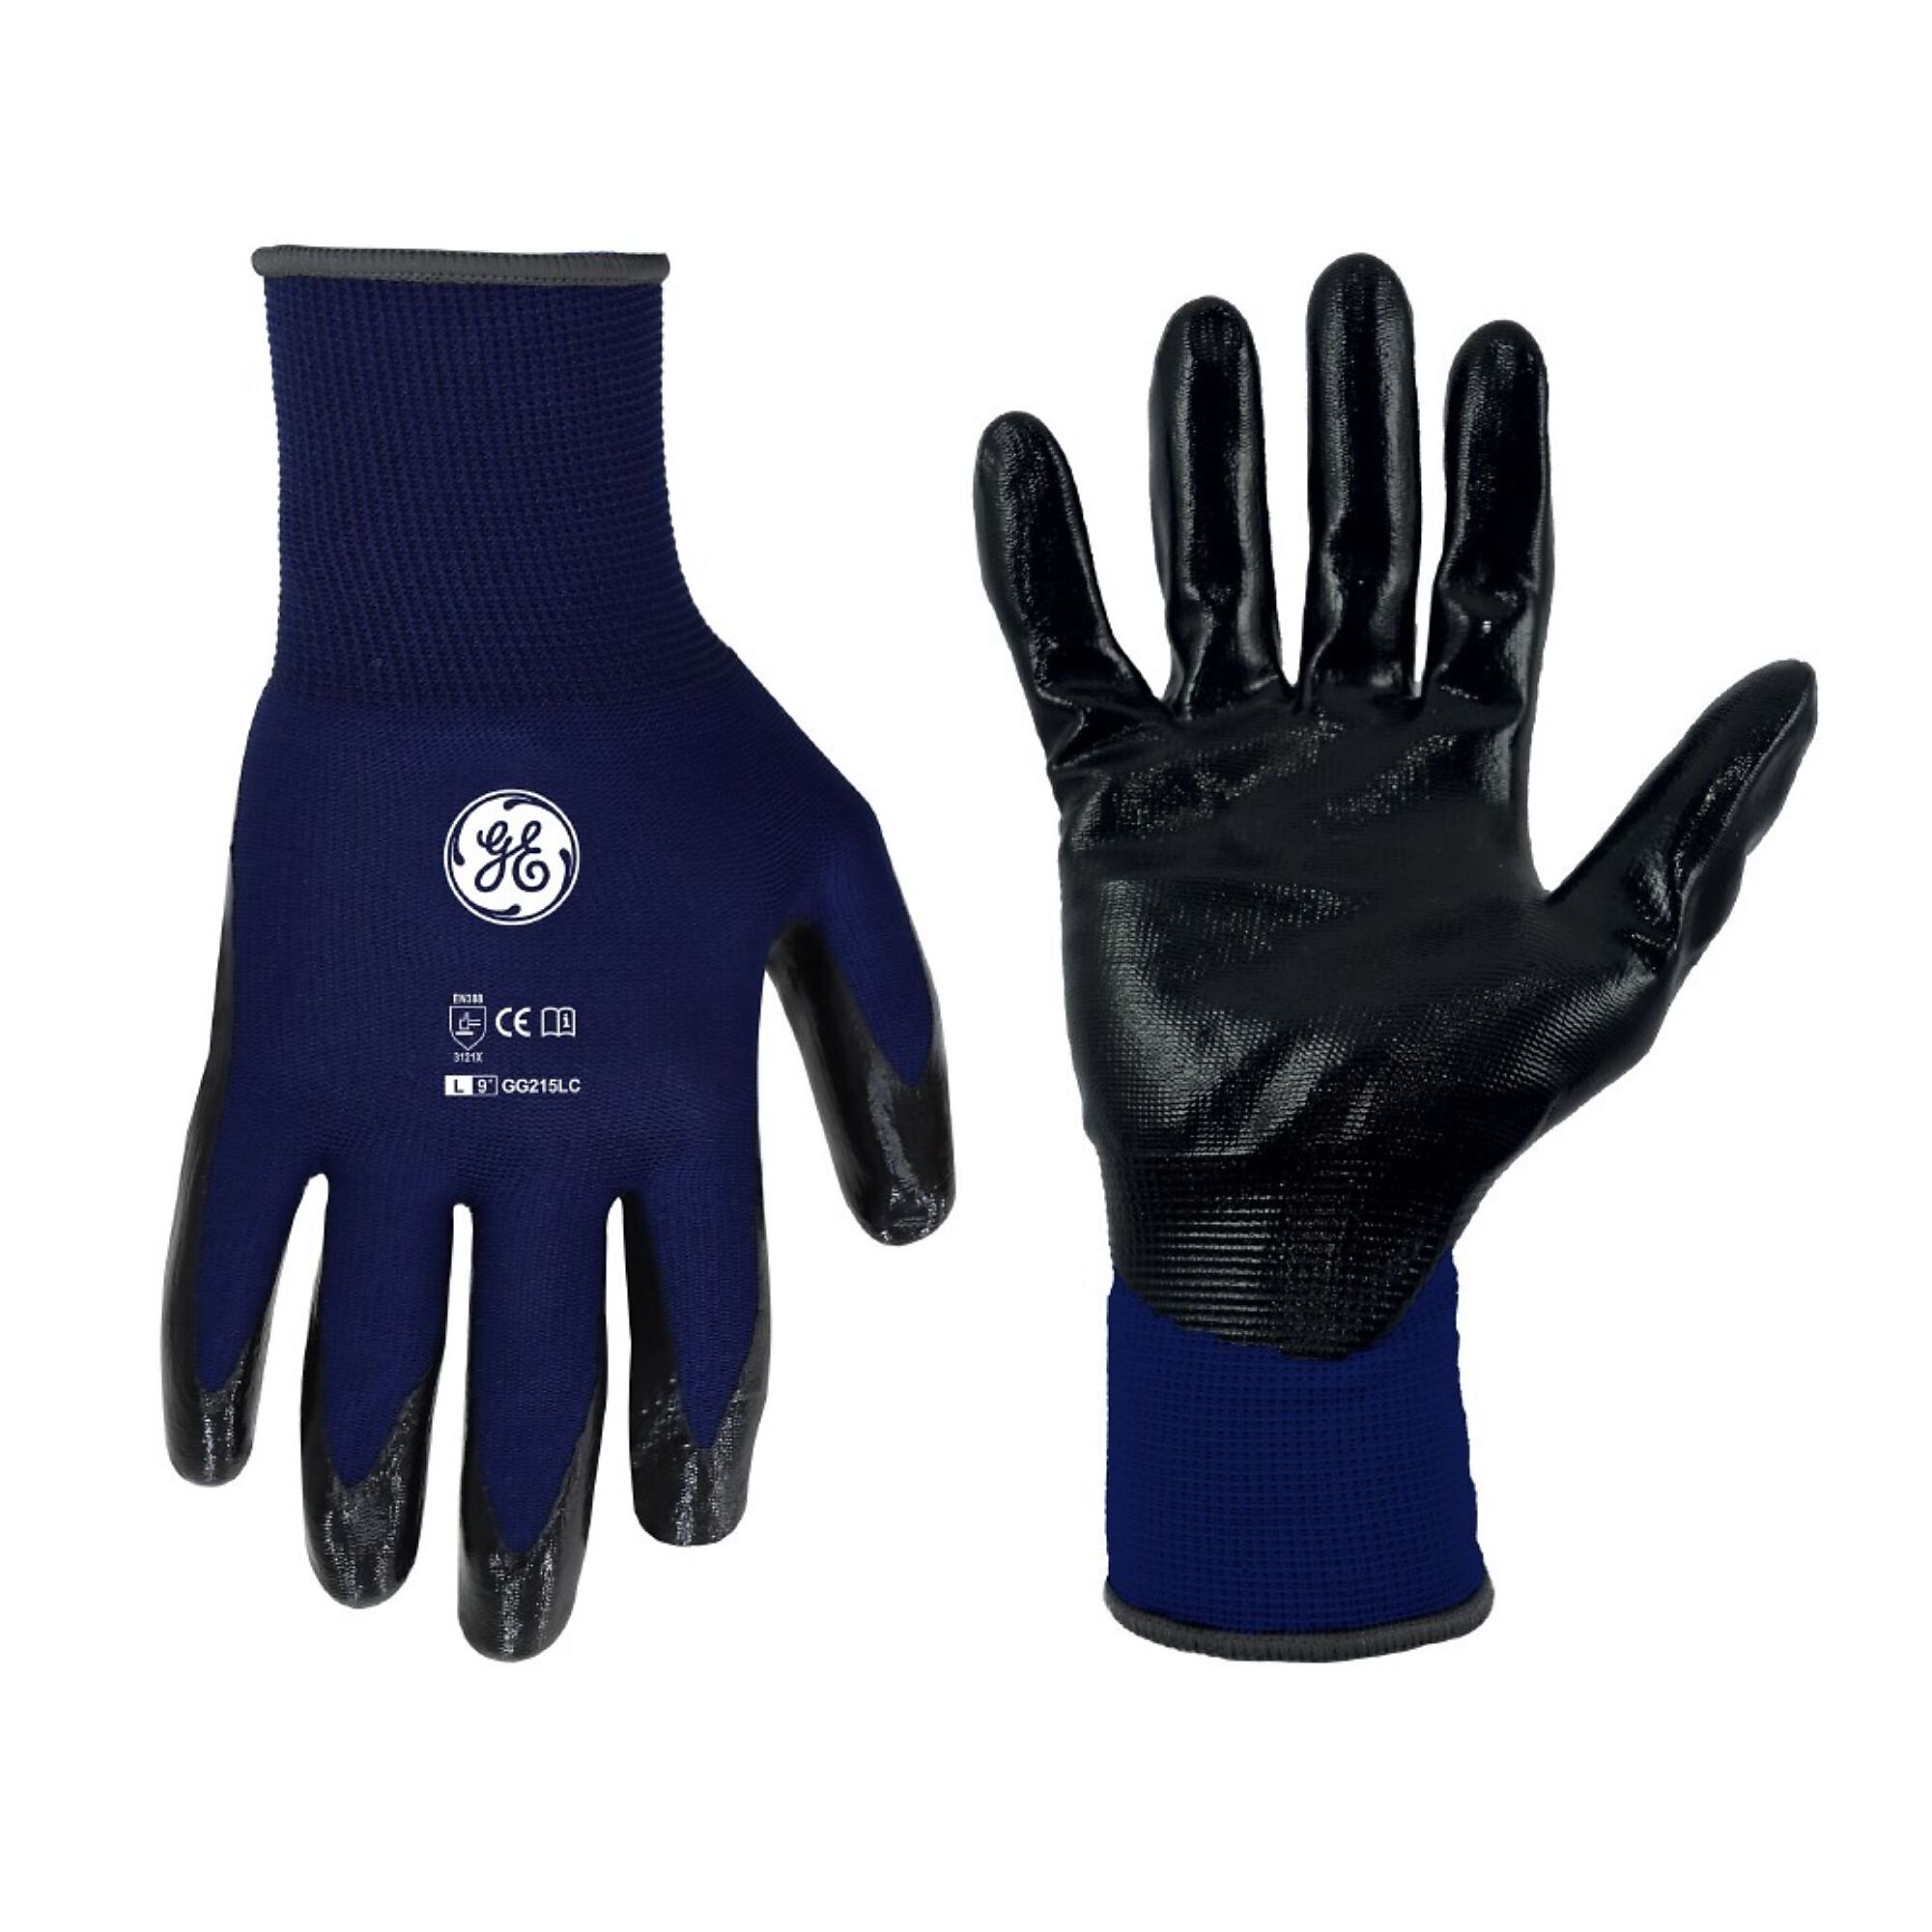 General Electric, Unisex Dipped Gloves Black/Blue L 12 pair, Size L, Included (qty.) 12, Model GG215L